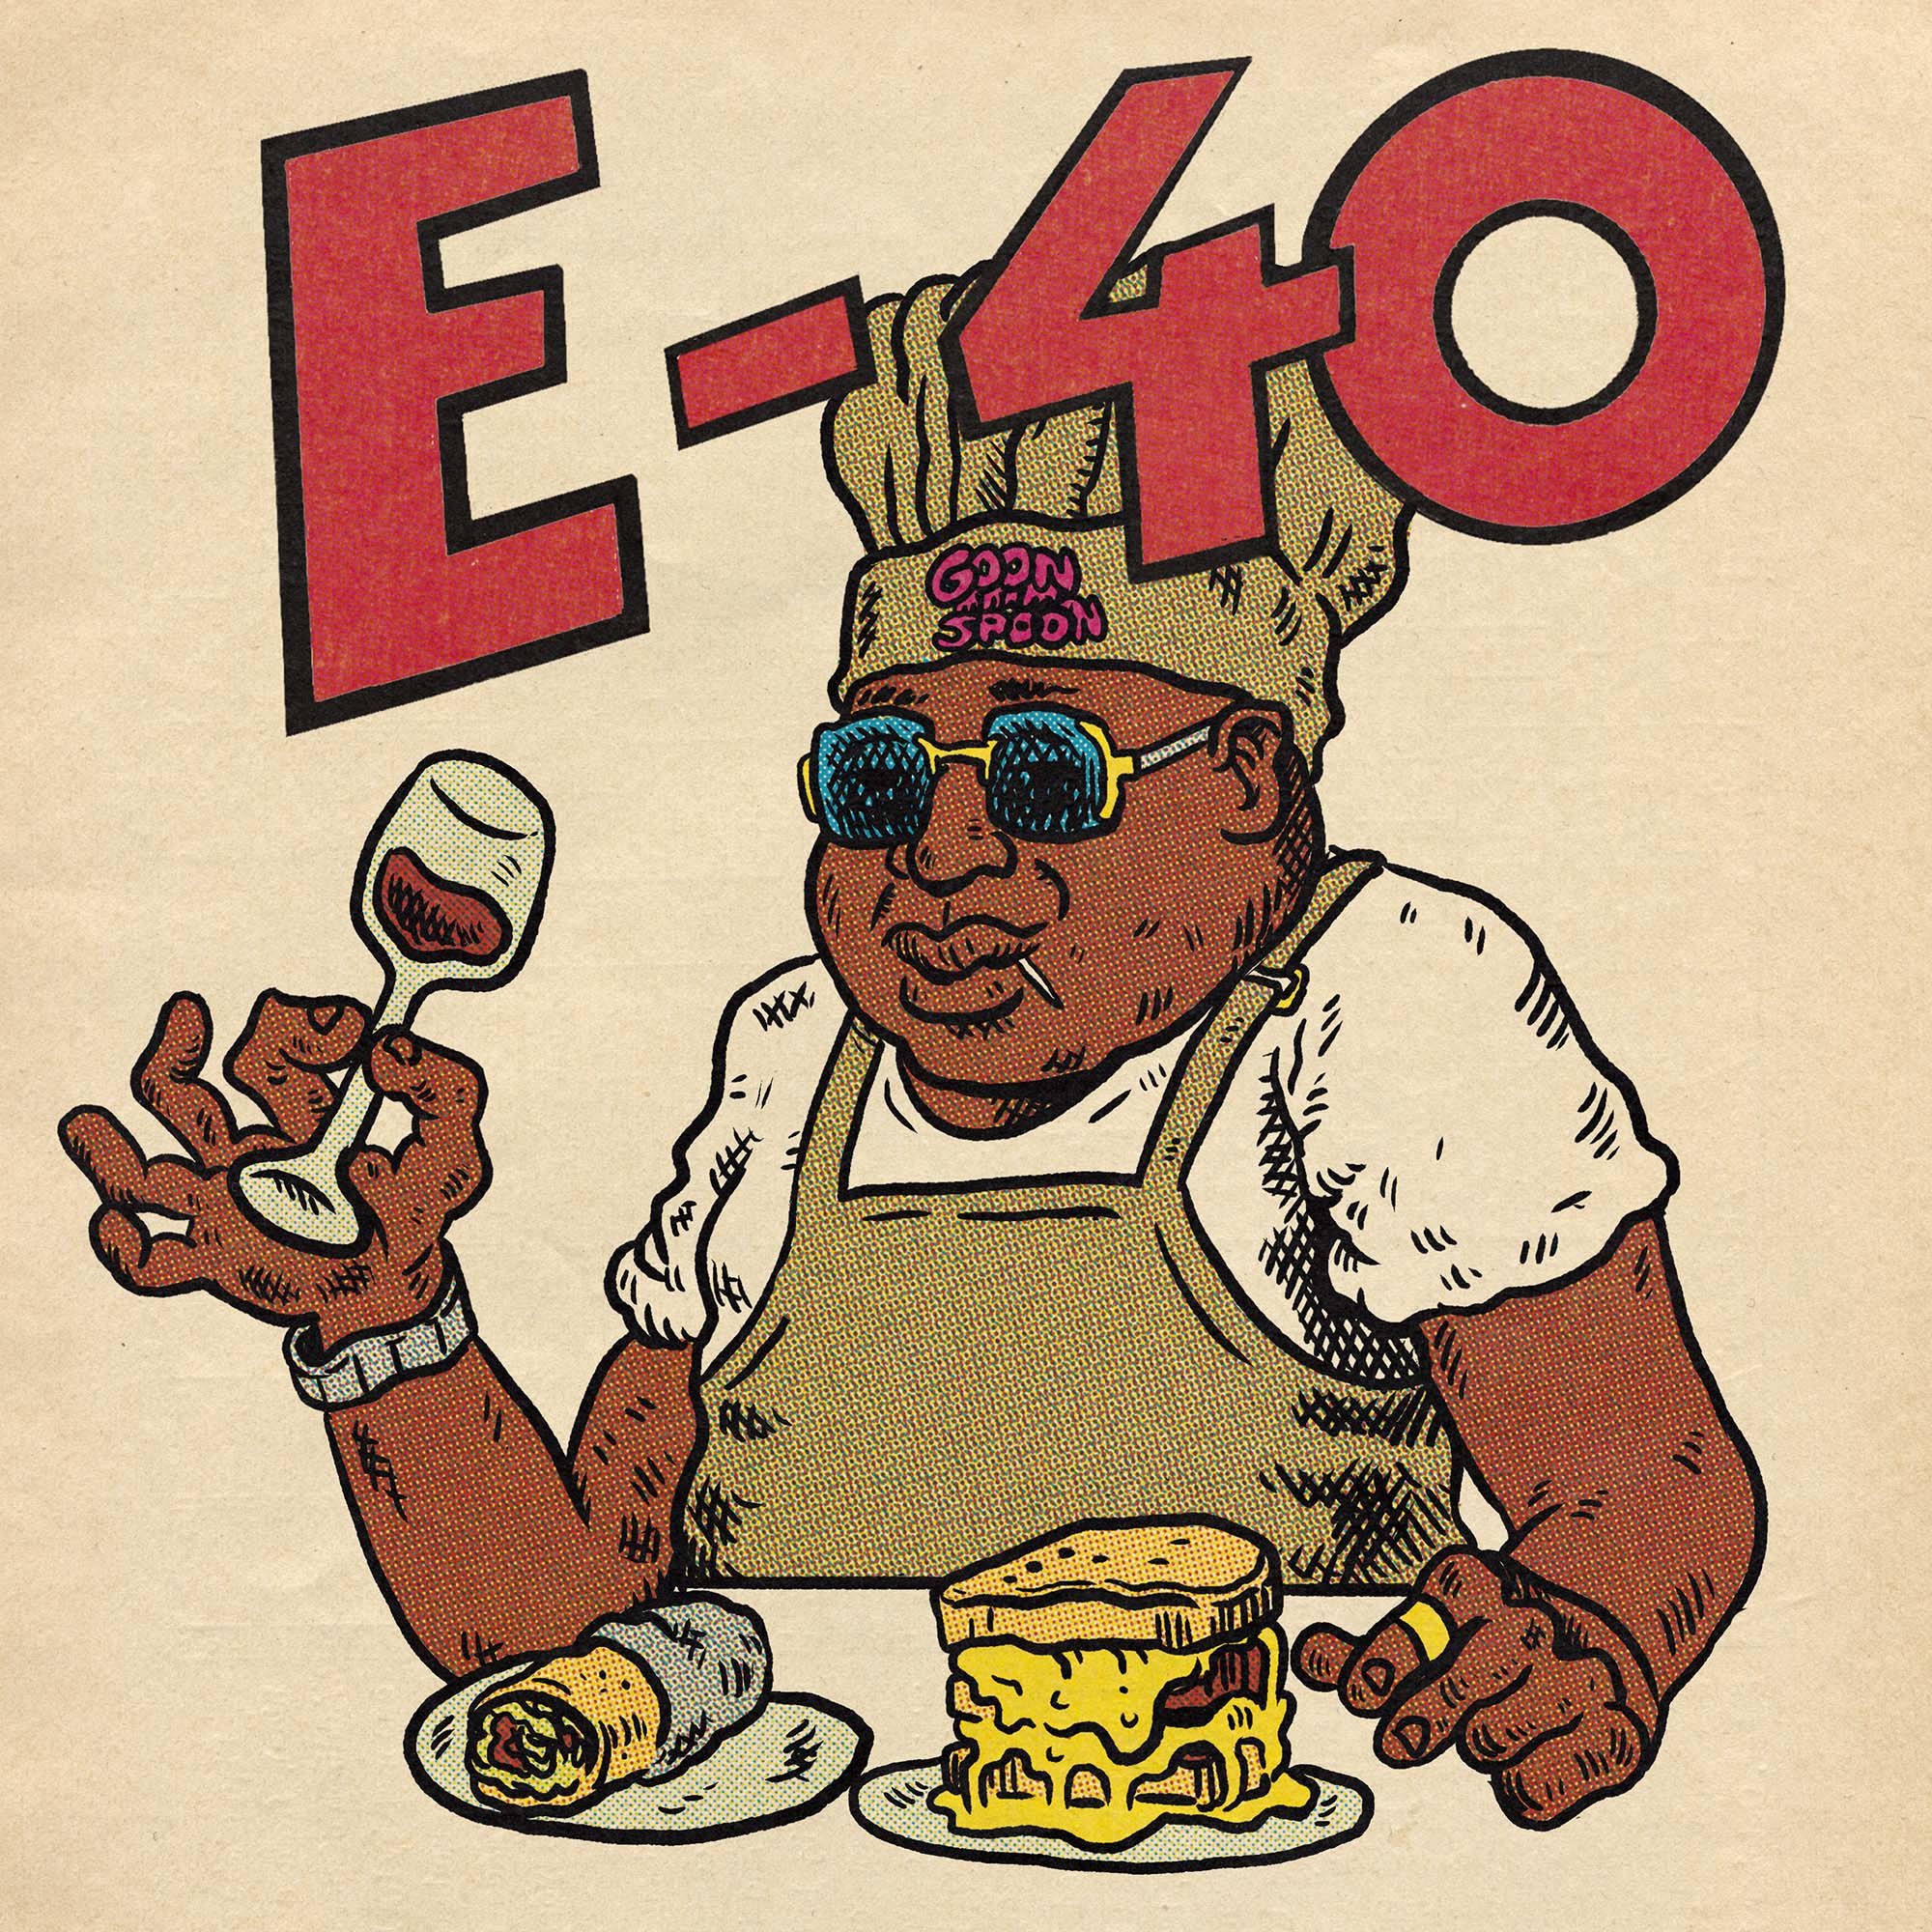 Illustration of the rapper E-40 in sunglasses and a beige apron, holding a glass of red wine. In front of him are a burrito and a grilled cheese sandwich.